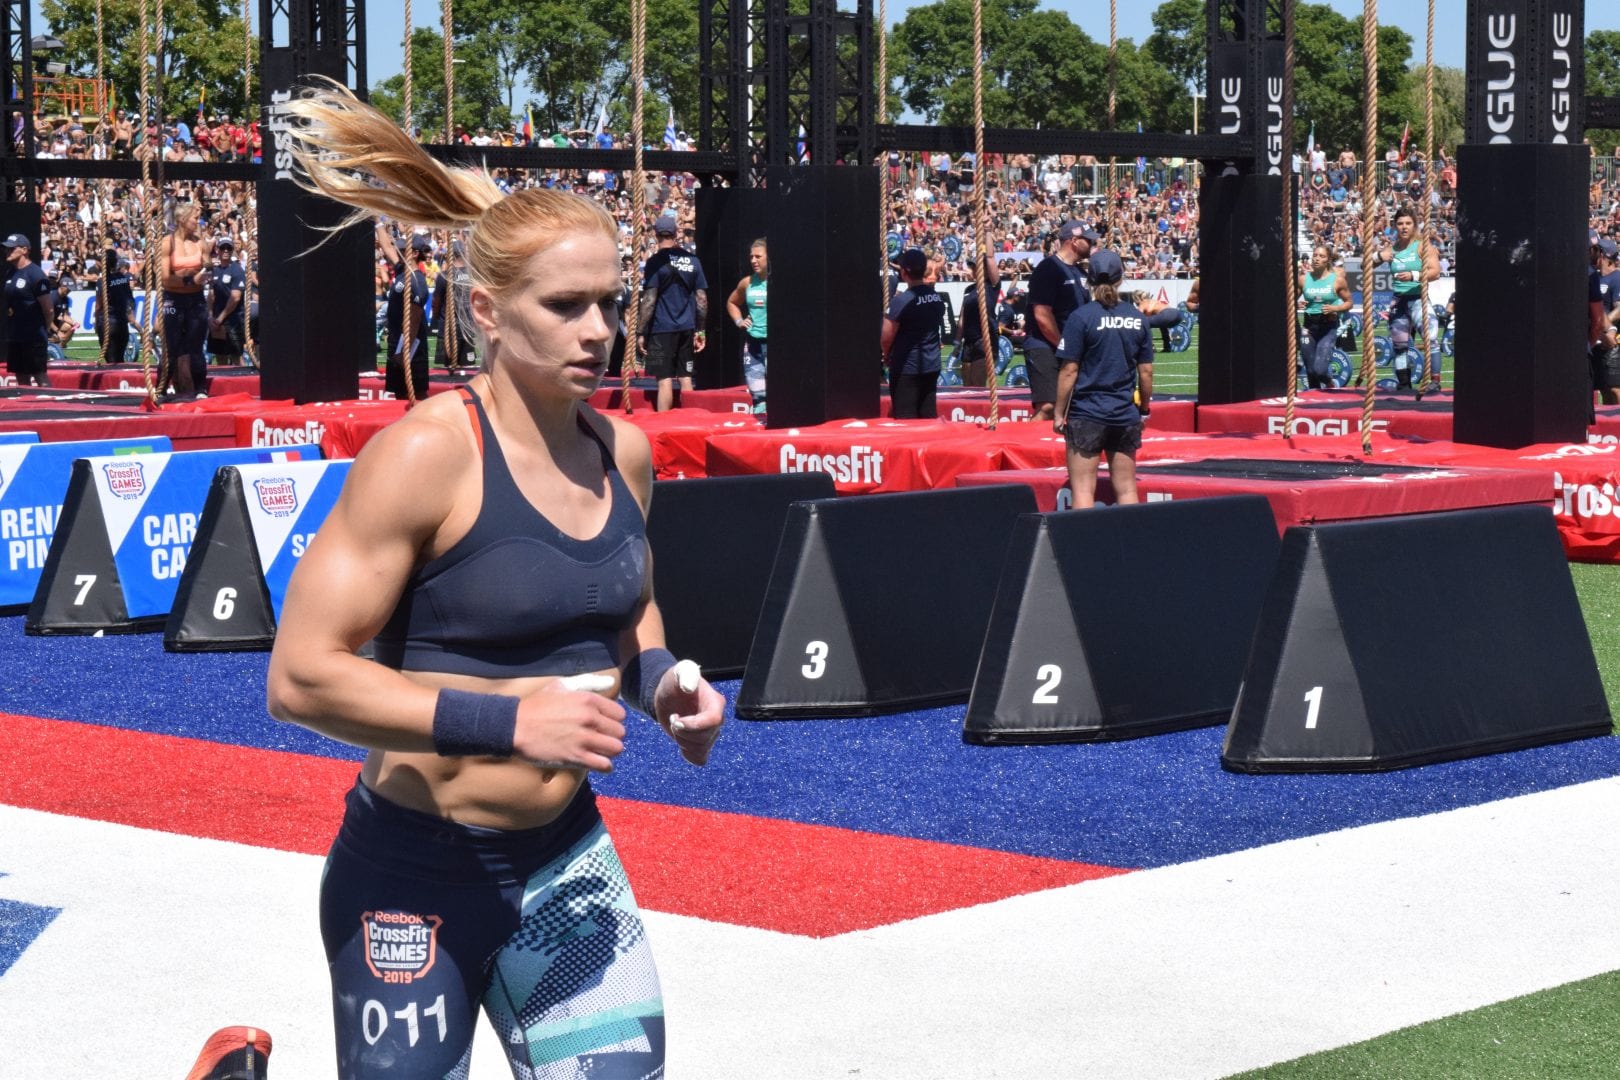 Annie Thorisdottir completes a run before starting her legless rope climbs at the CrossFit Games.